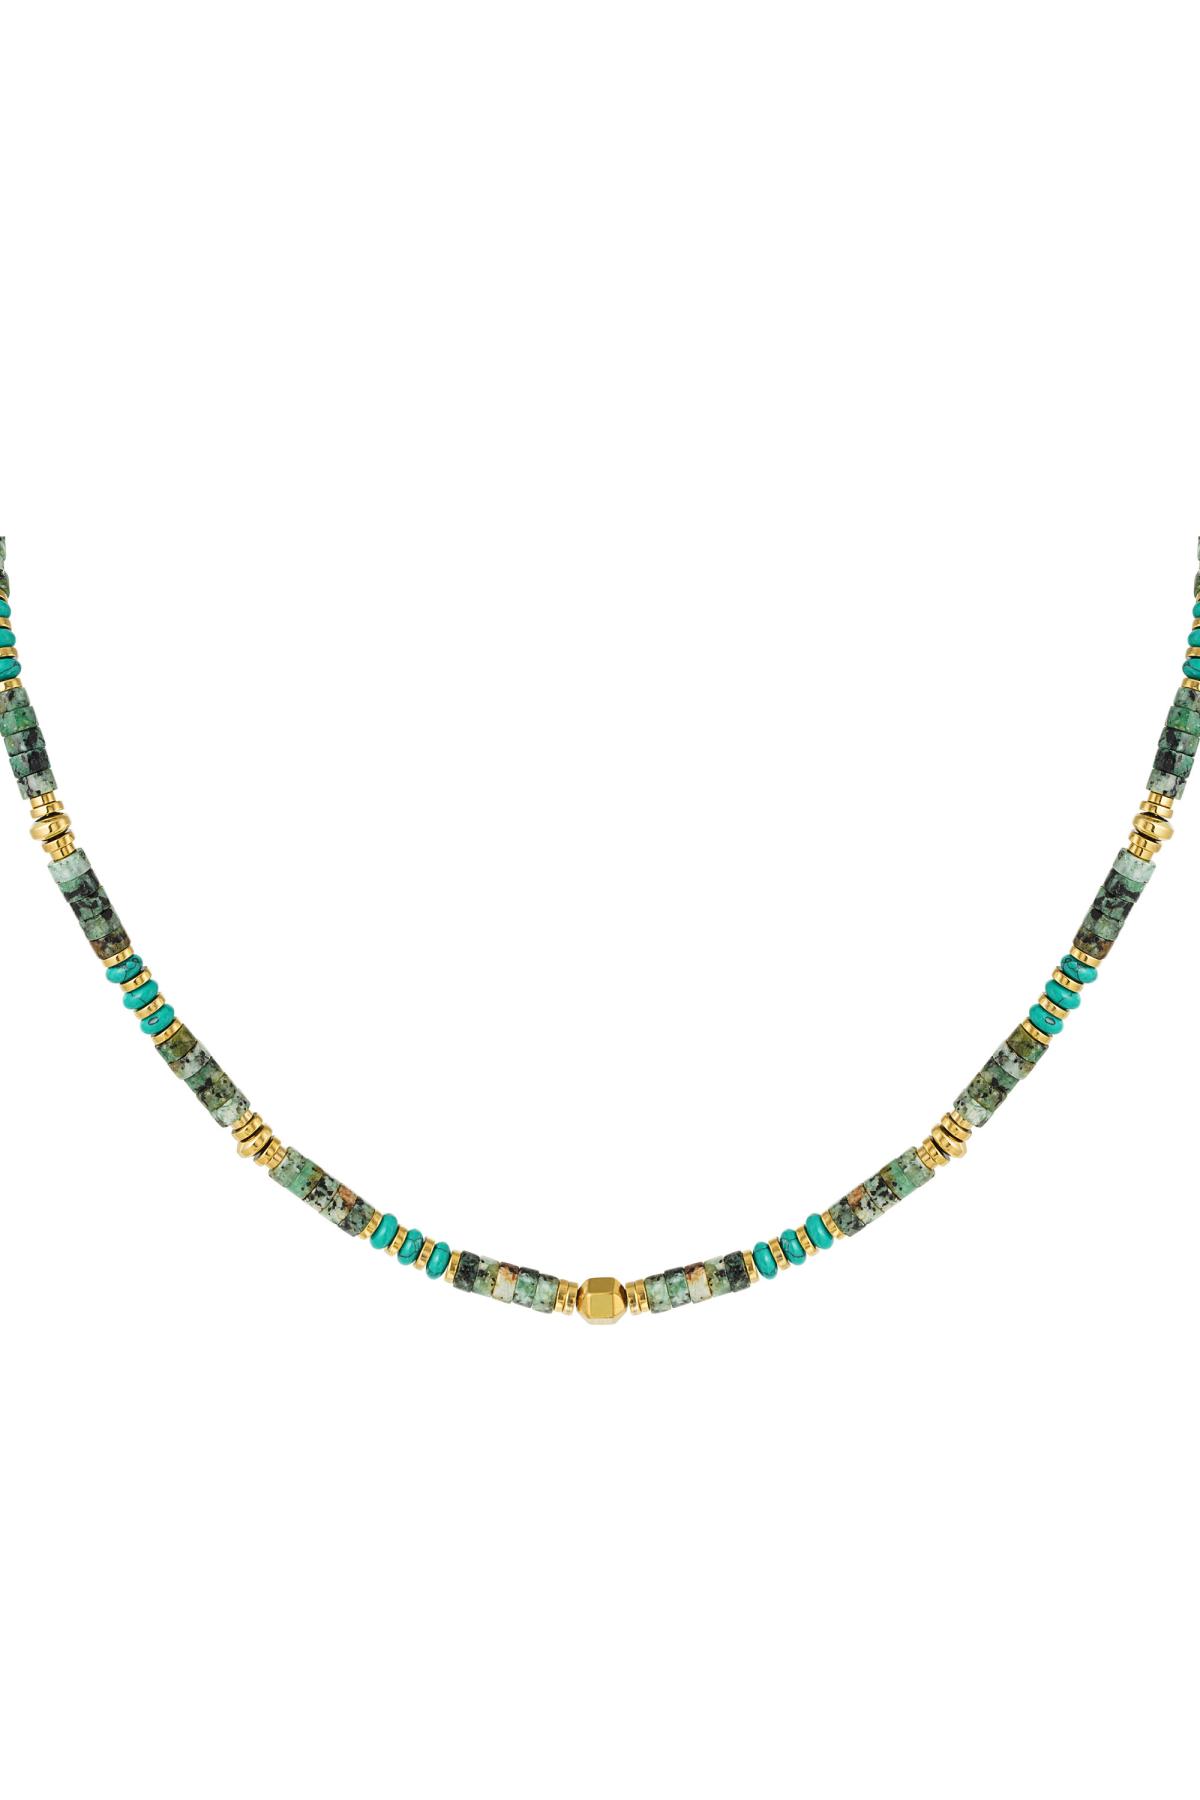 Necklace cheerful beads - Natural stones collection Green & Gold 